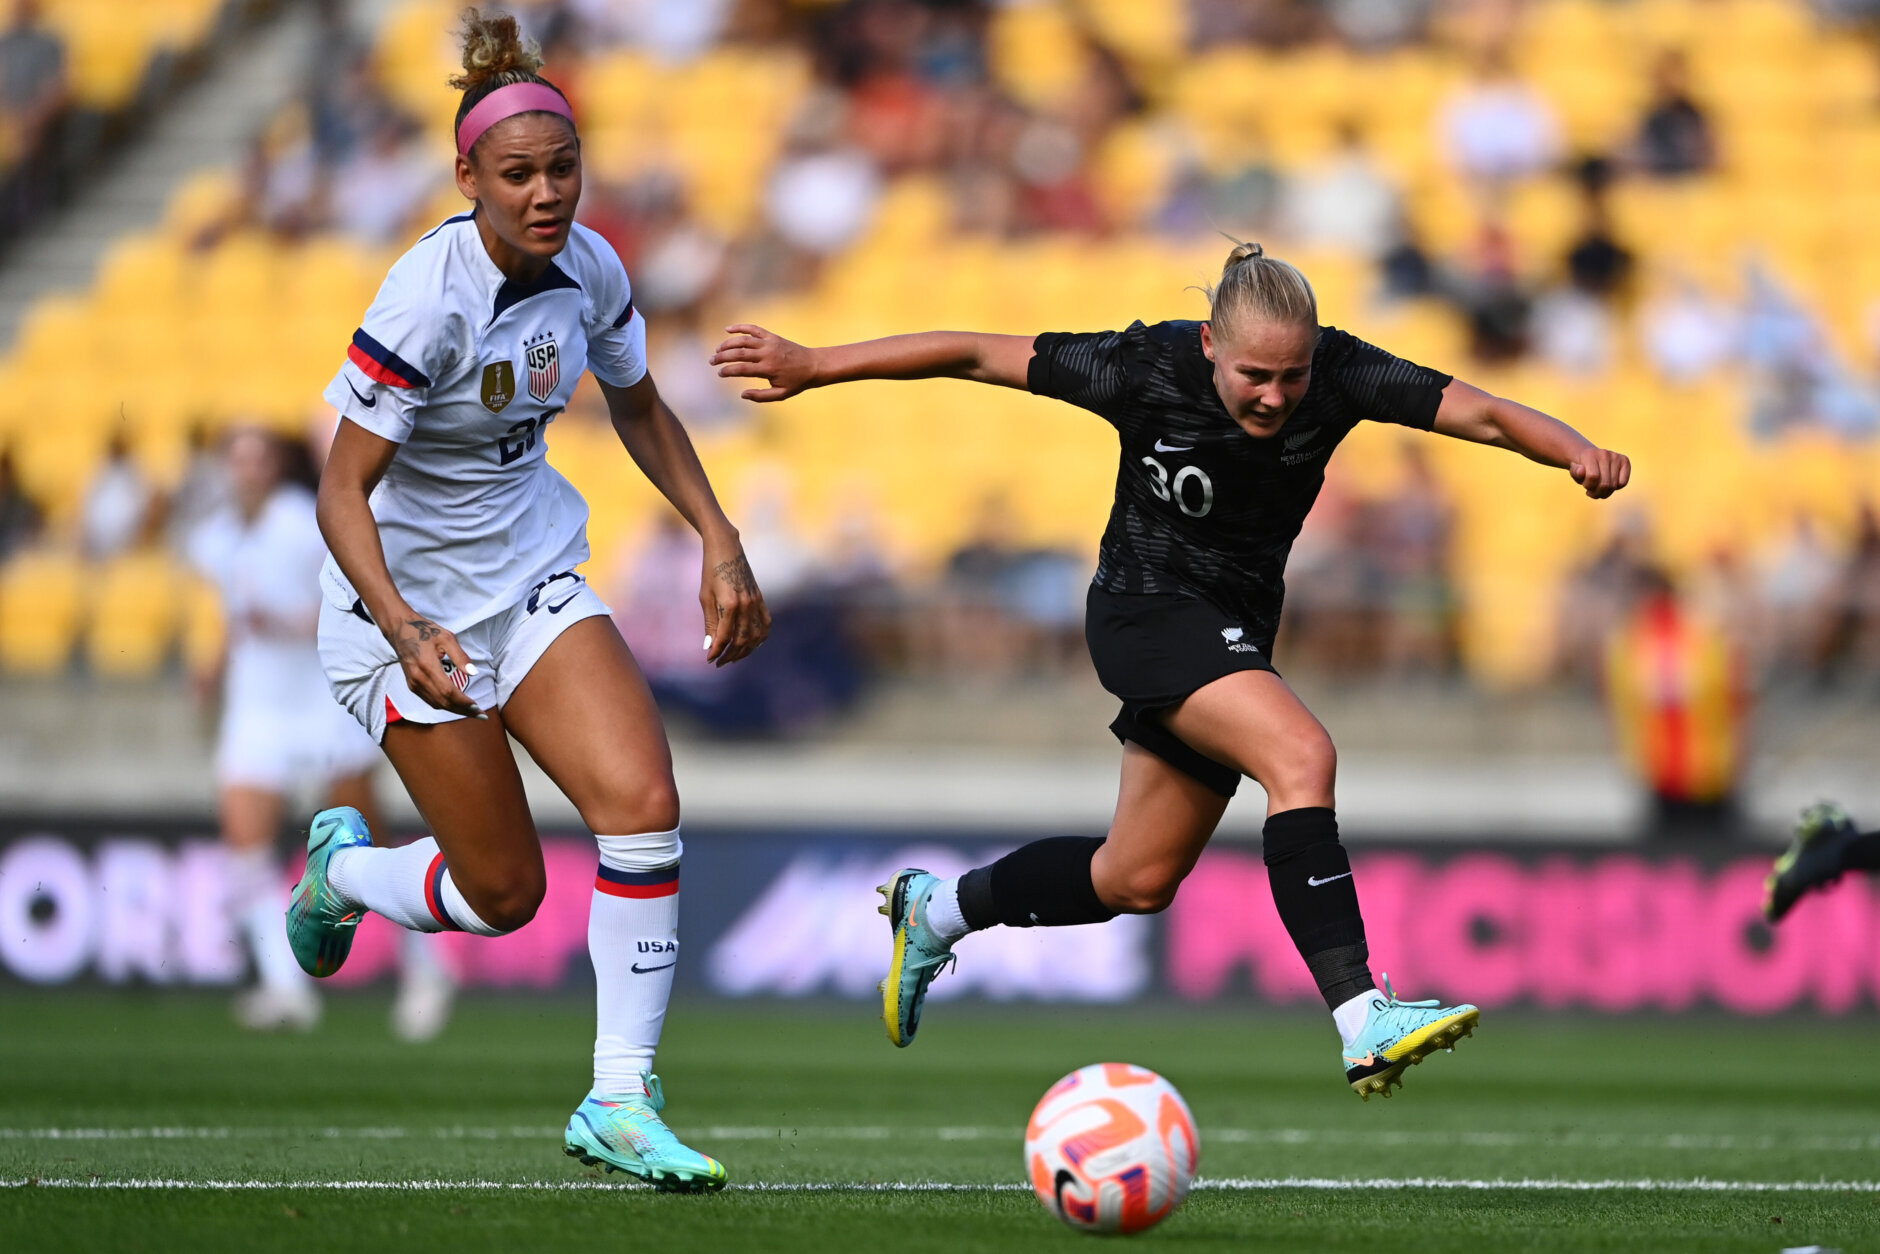 WELLINGTON, NEW ZEALAND - JANUARY 18: Trinity Rodman of USA competes with Ashleigh Ward of New Zealand during the International friendly fixture match between the New Zealand Football Ferns and the United States at Sky Stadium on January 18, 2023 in Wellington, New Zealand. (Photo by Hannah Peters/Getty Images)